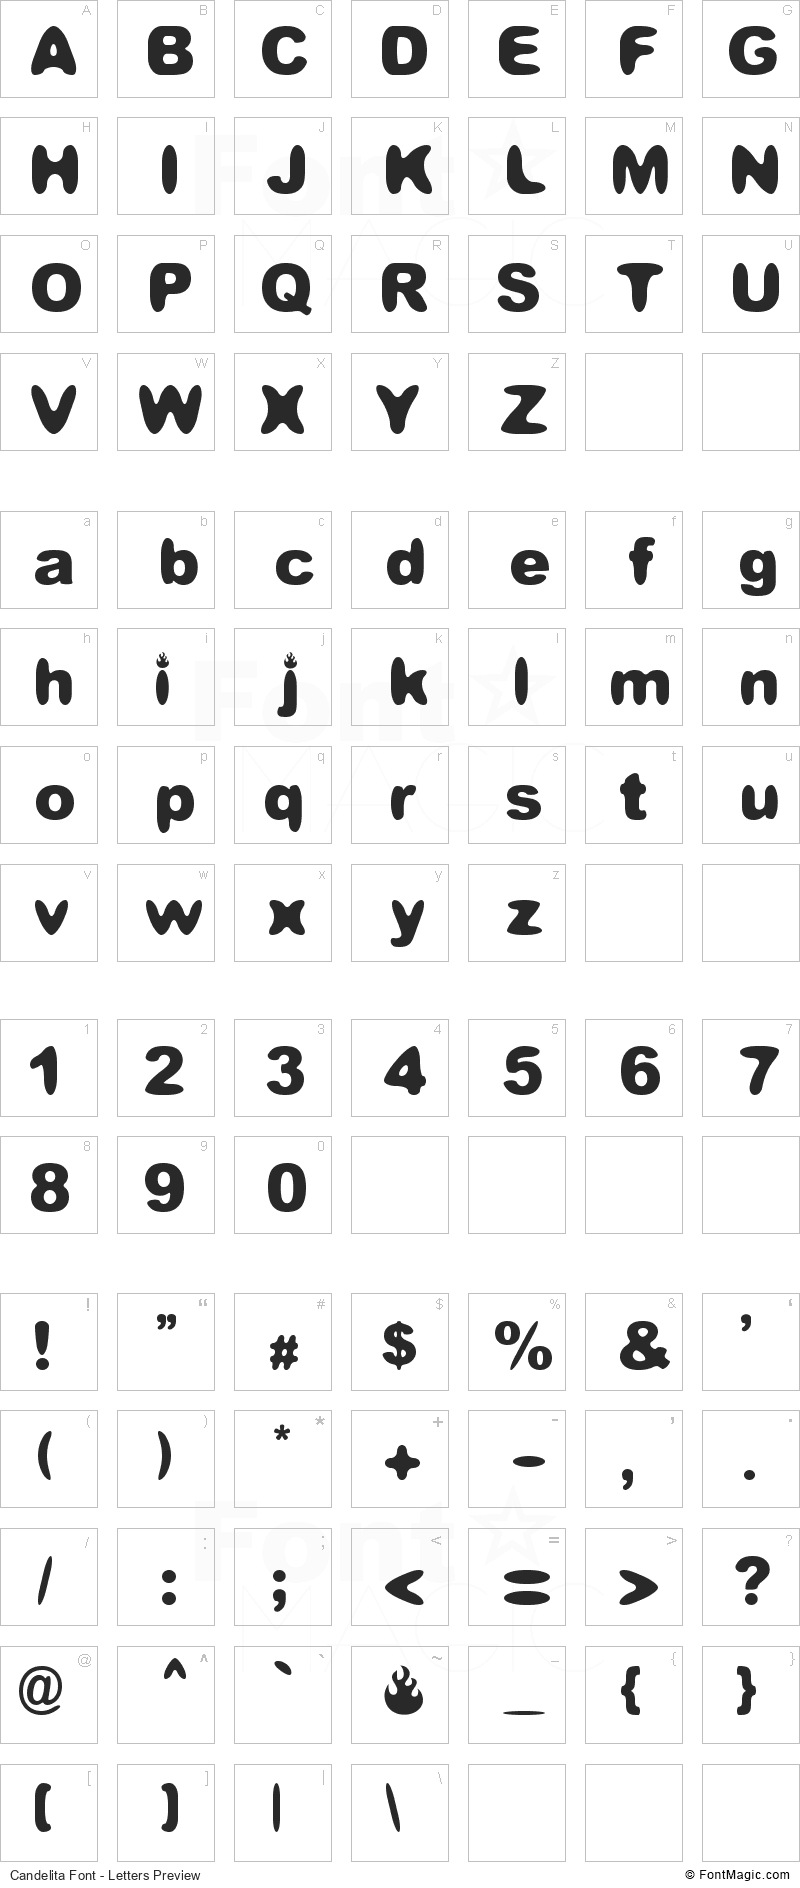 Candelita Font - All Latters Preview Chart